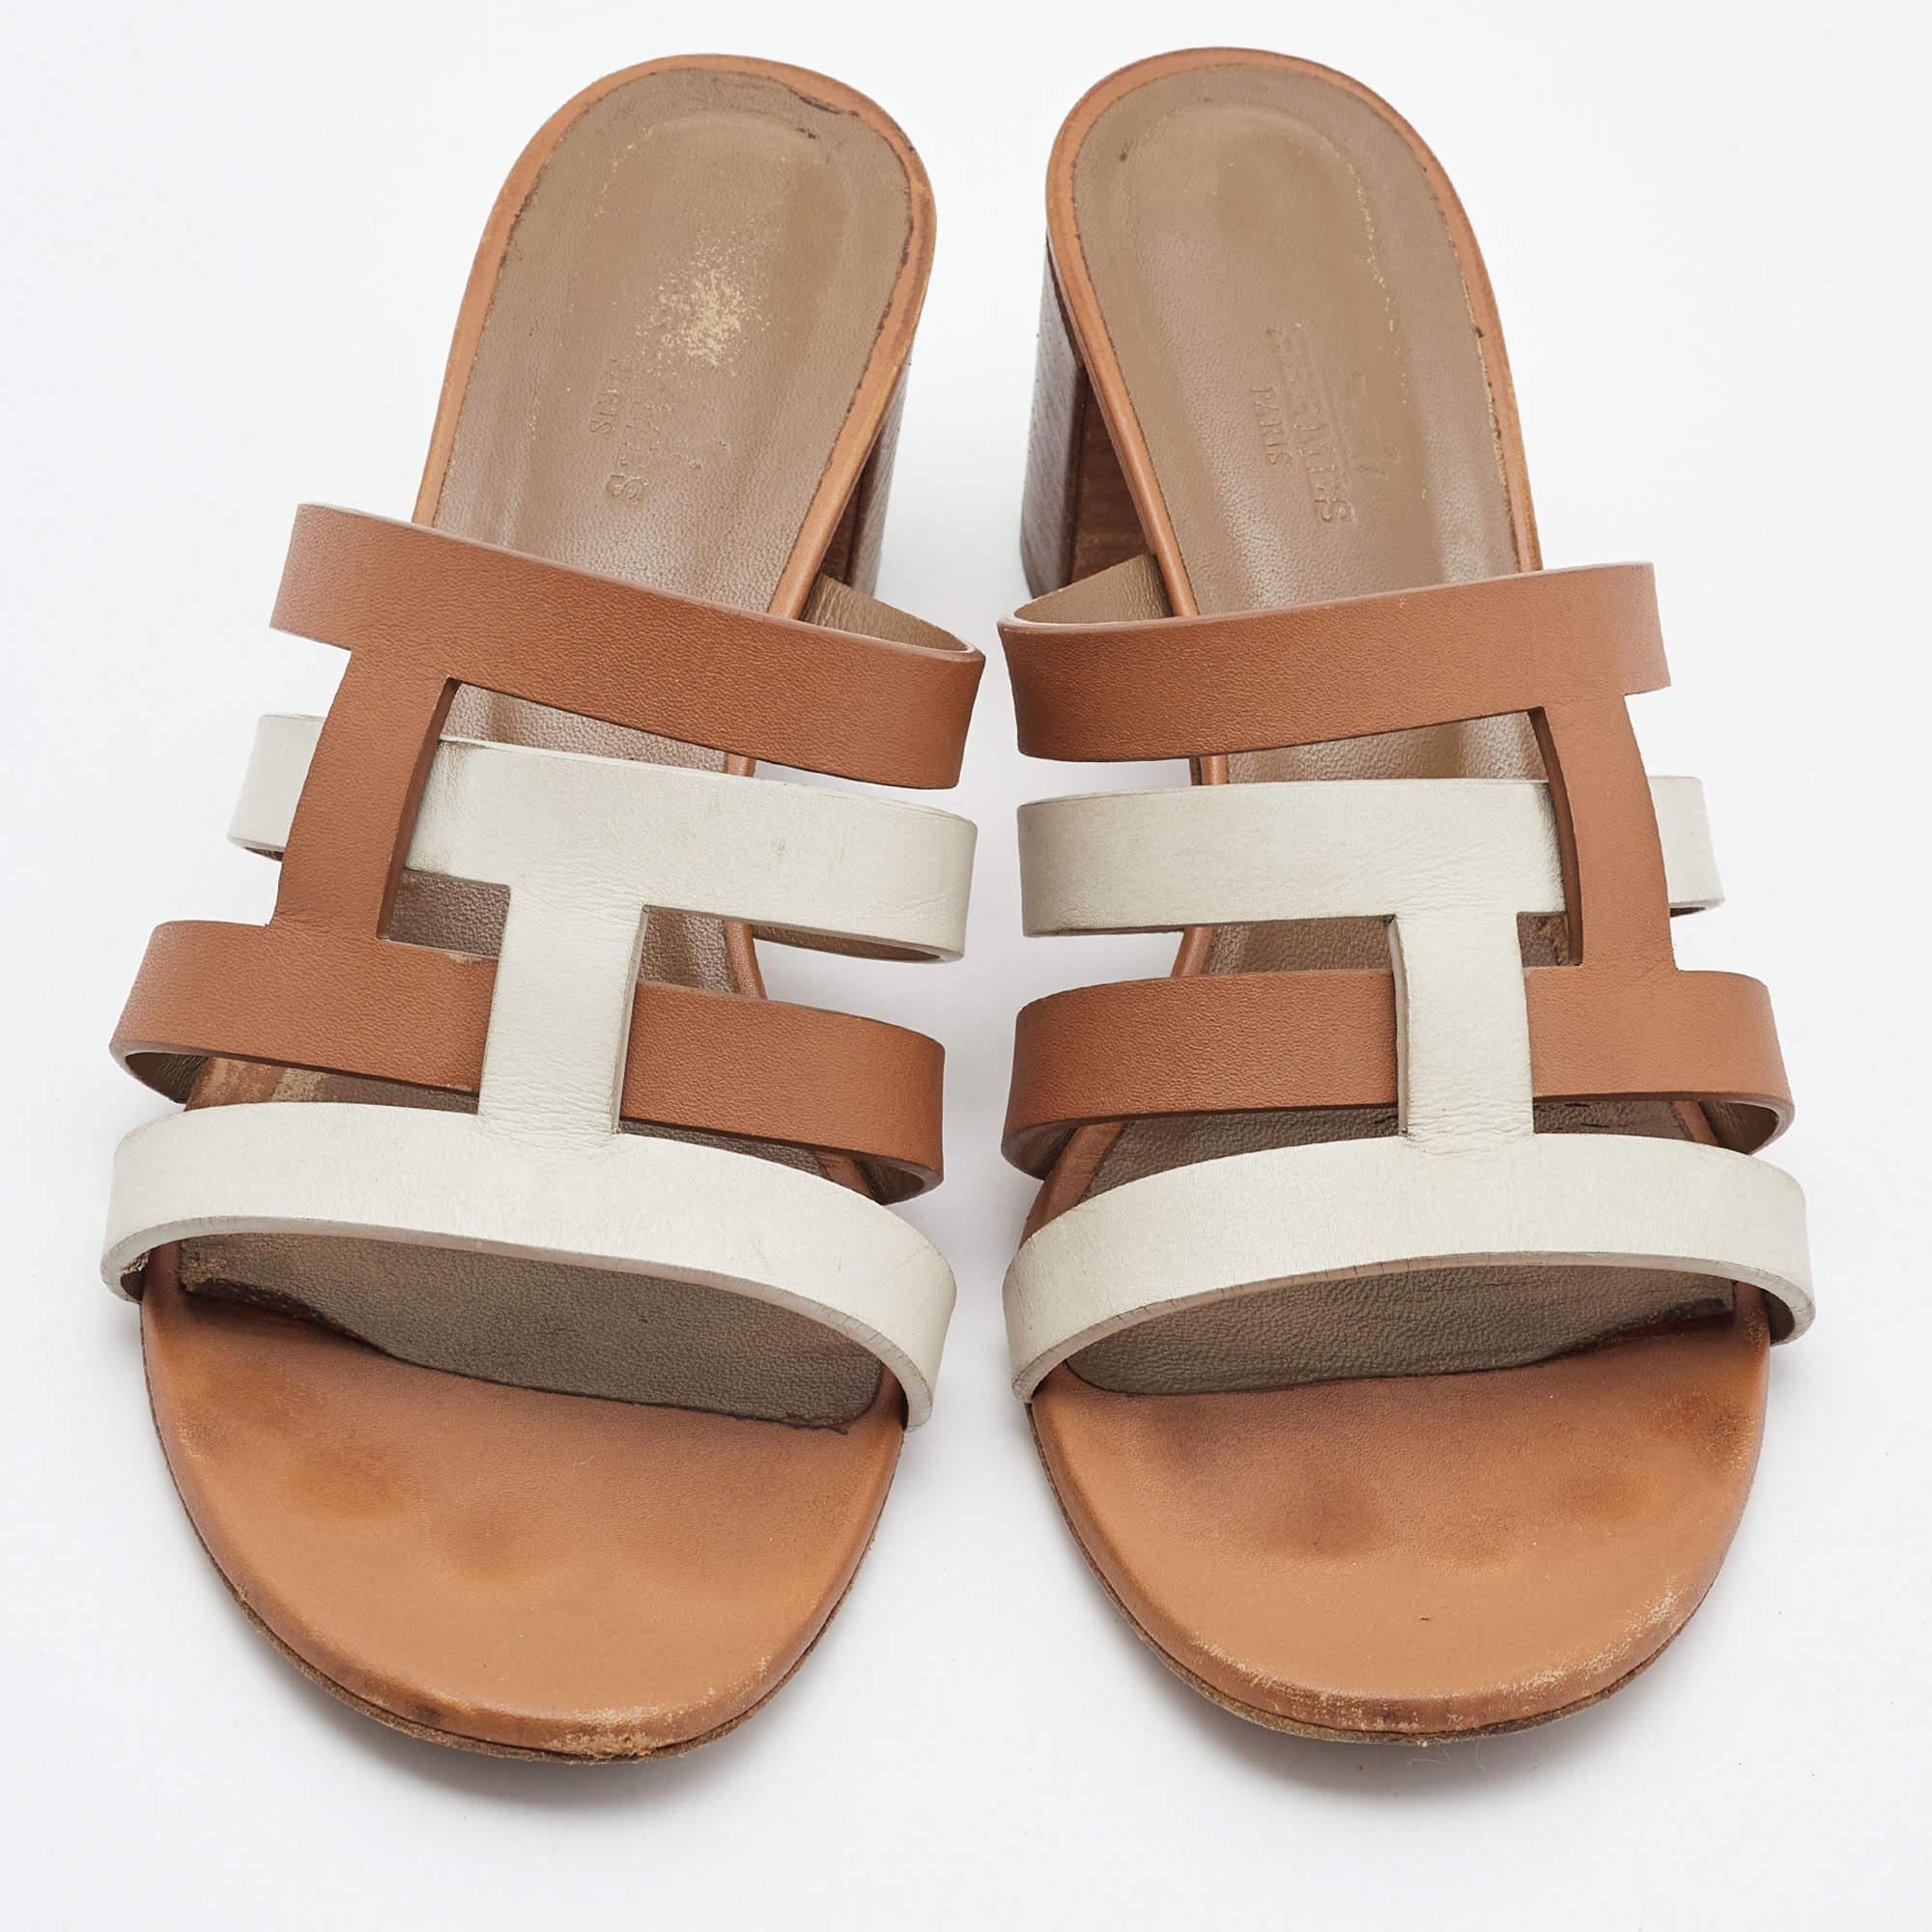 Women's Hermes Brown/White Leather Amica Sandals Size 39.5